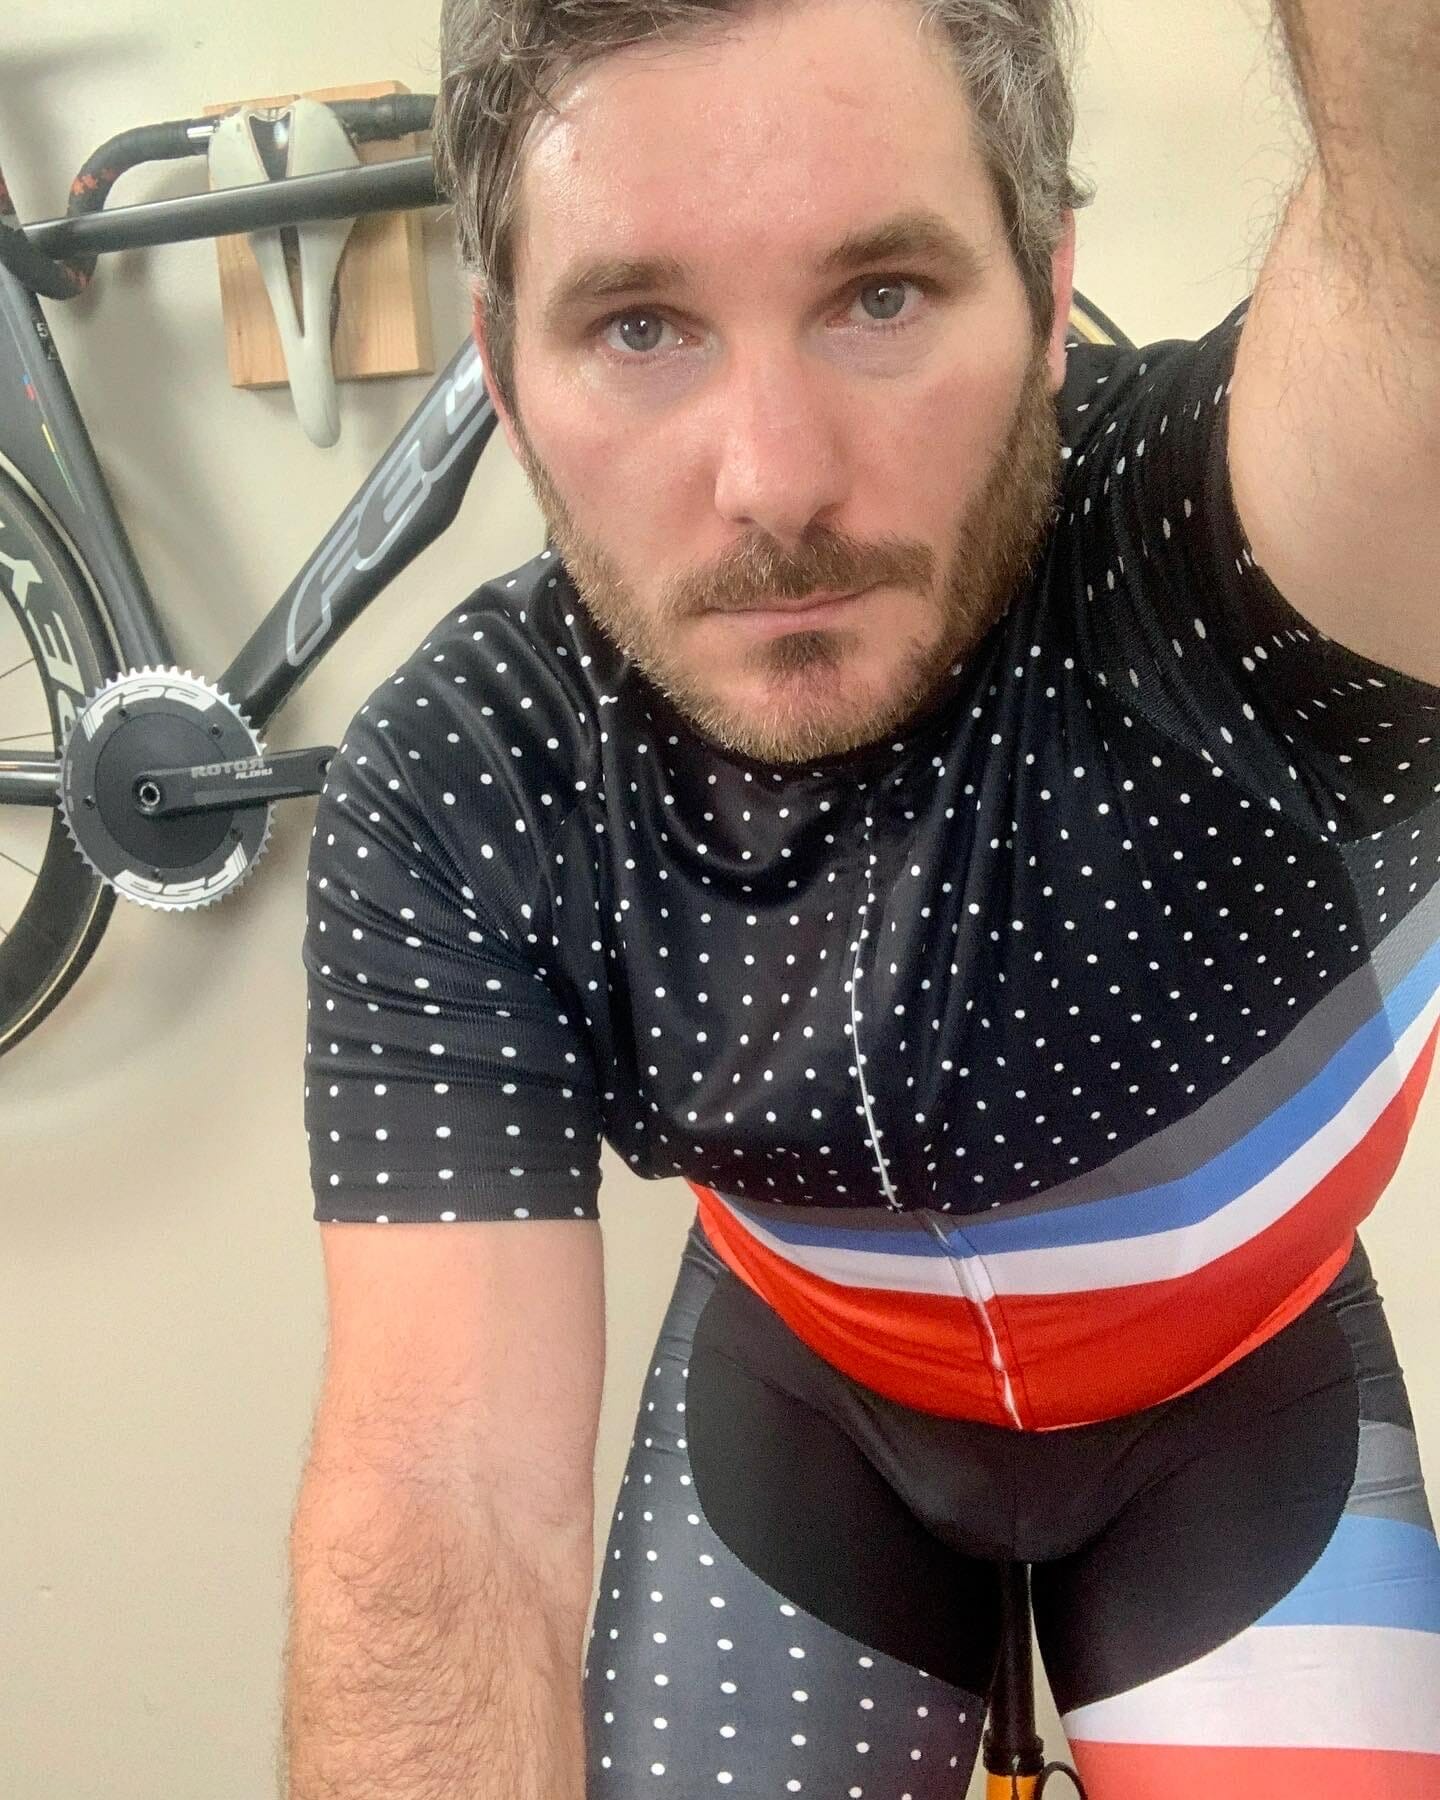 wearing the kit on the trainer